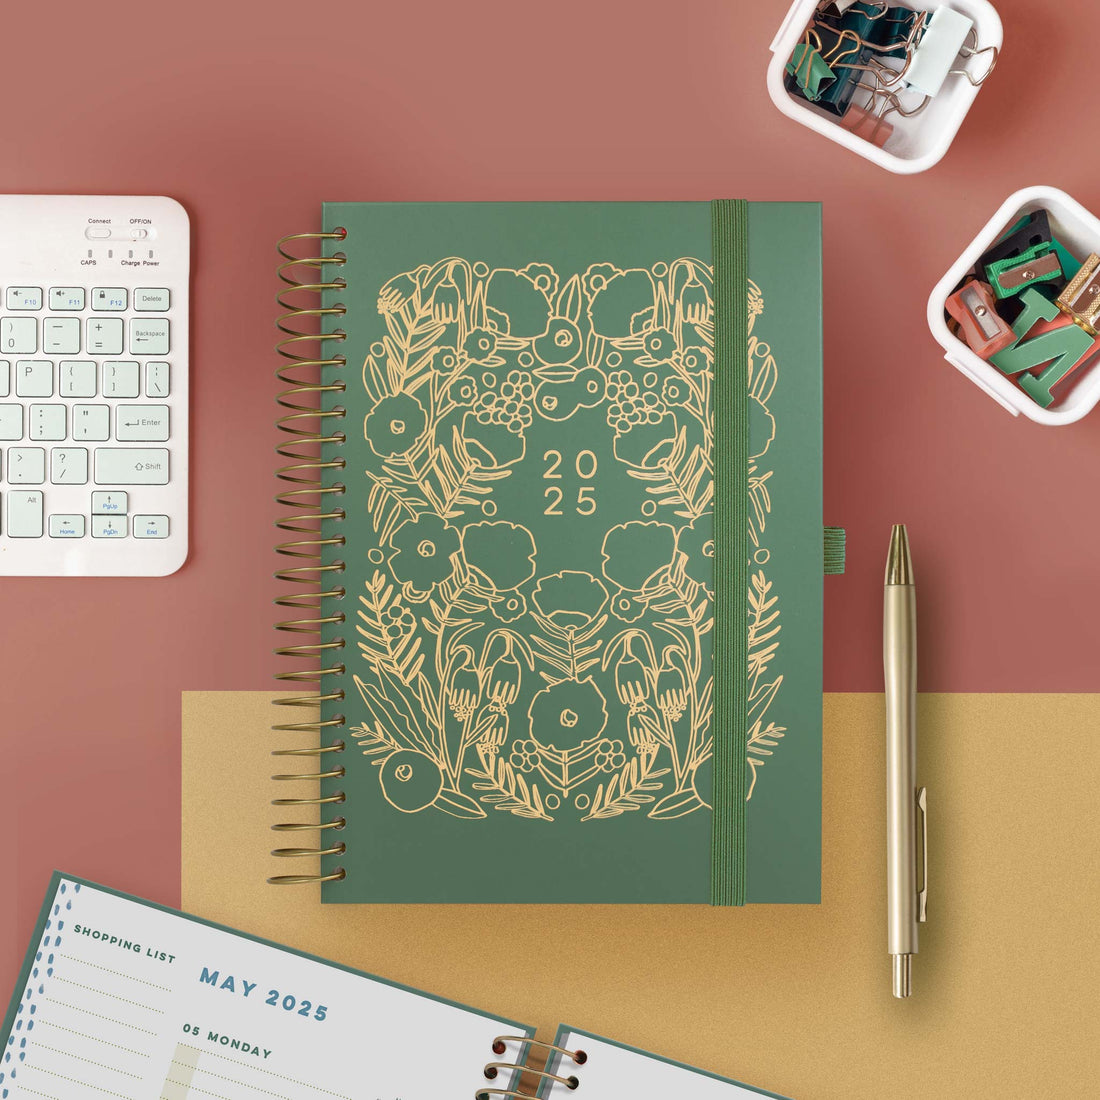 A spiral bound diary planner with green floral design 